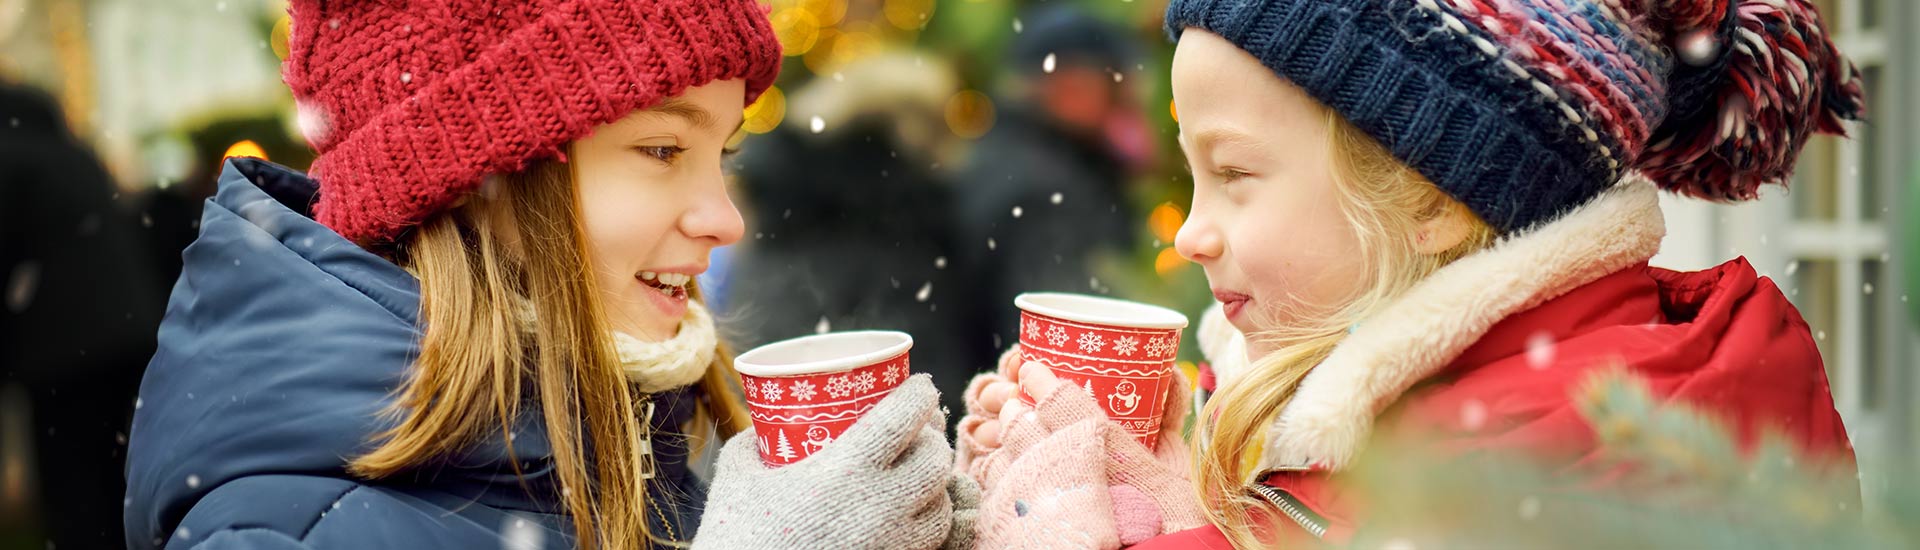 Close-up of two young girls drinking warm wassail outside at Christmastime among falling snowflakes, Branson, MO.